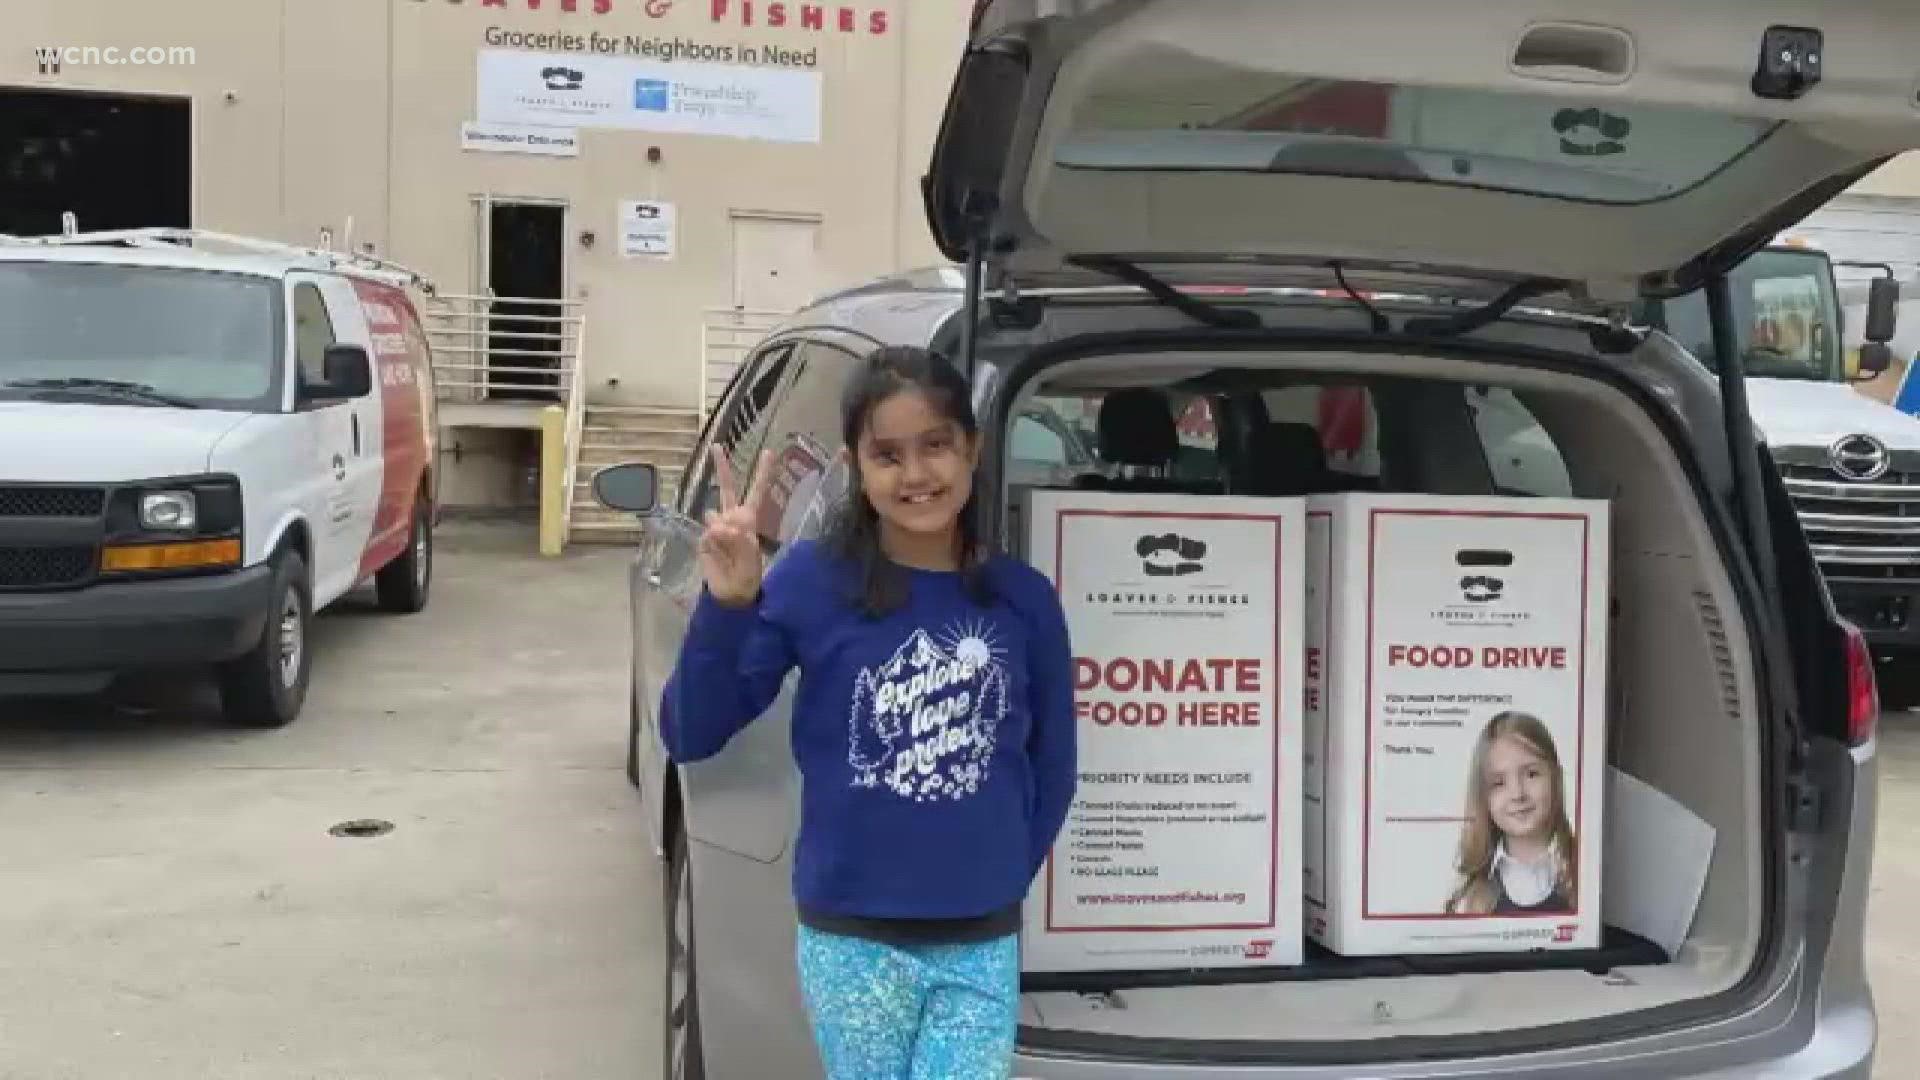 A Charlotte elementary school student says giving is better than receiving. So instead of presents for her birthday, she organized a food drive for those in need.